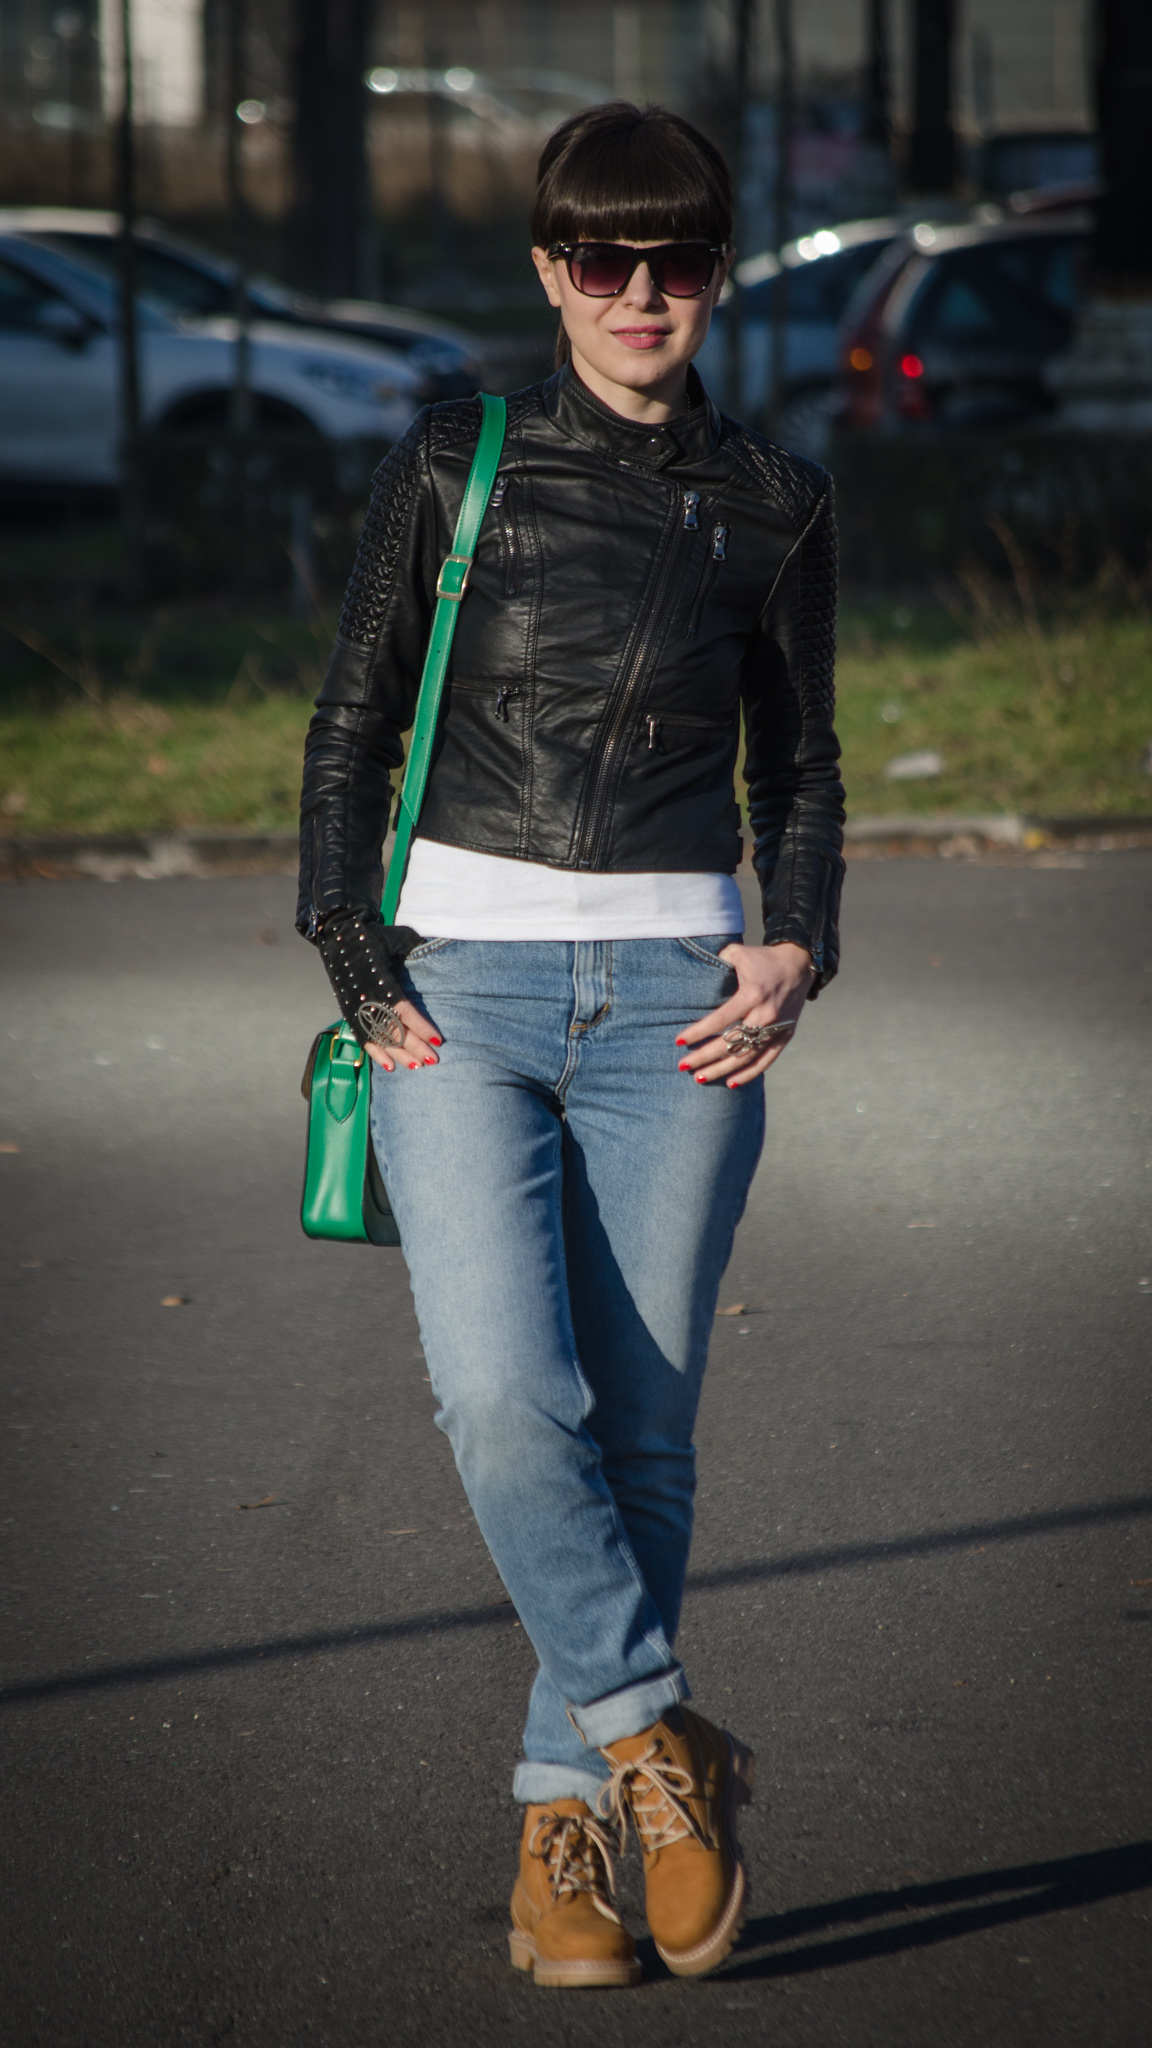 leather jacket new yorker green satchel bag tonka jeans mom jeans h&m worker camel boots romanian producer green white sheinside top bangs rocking rocker coca-cola dog tag